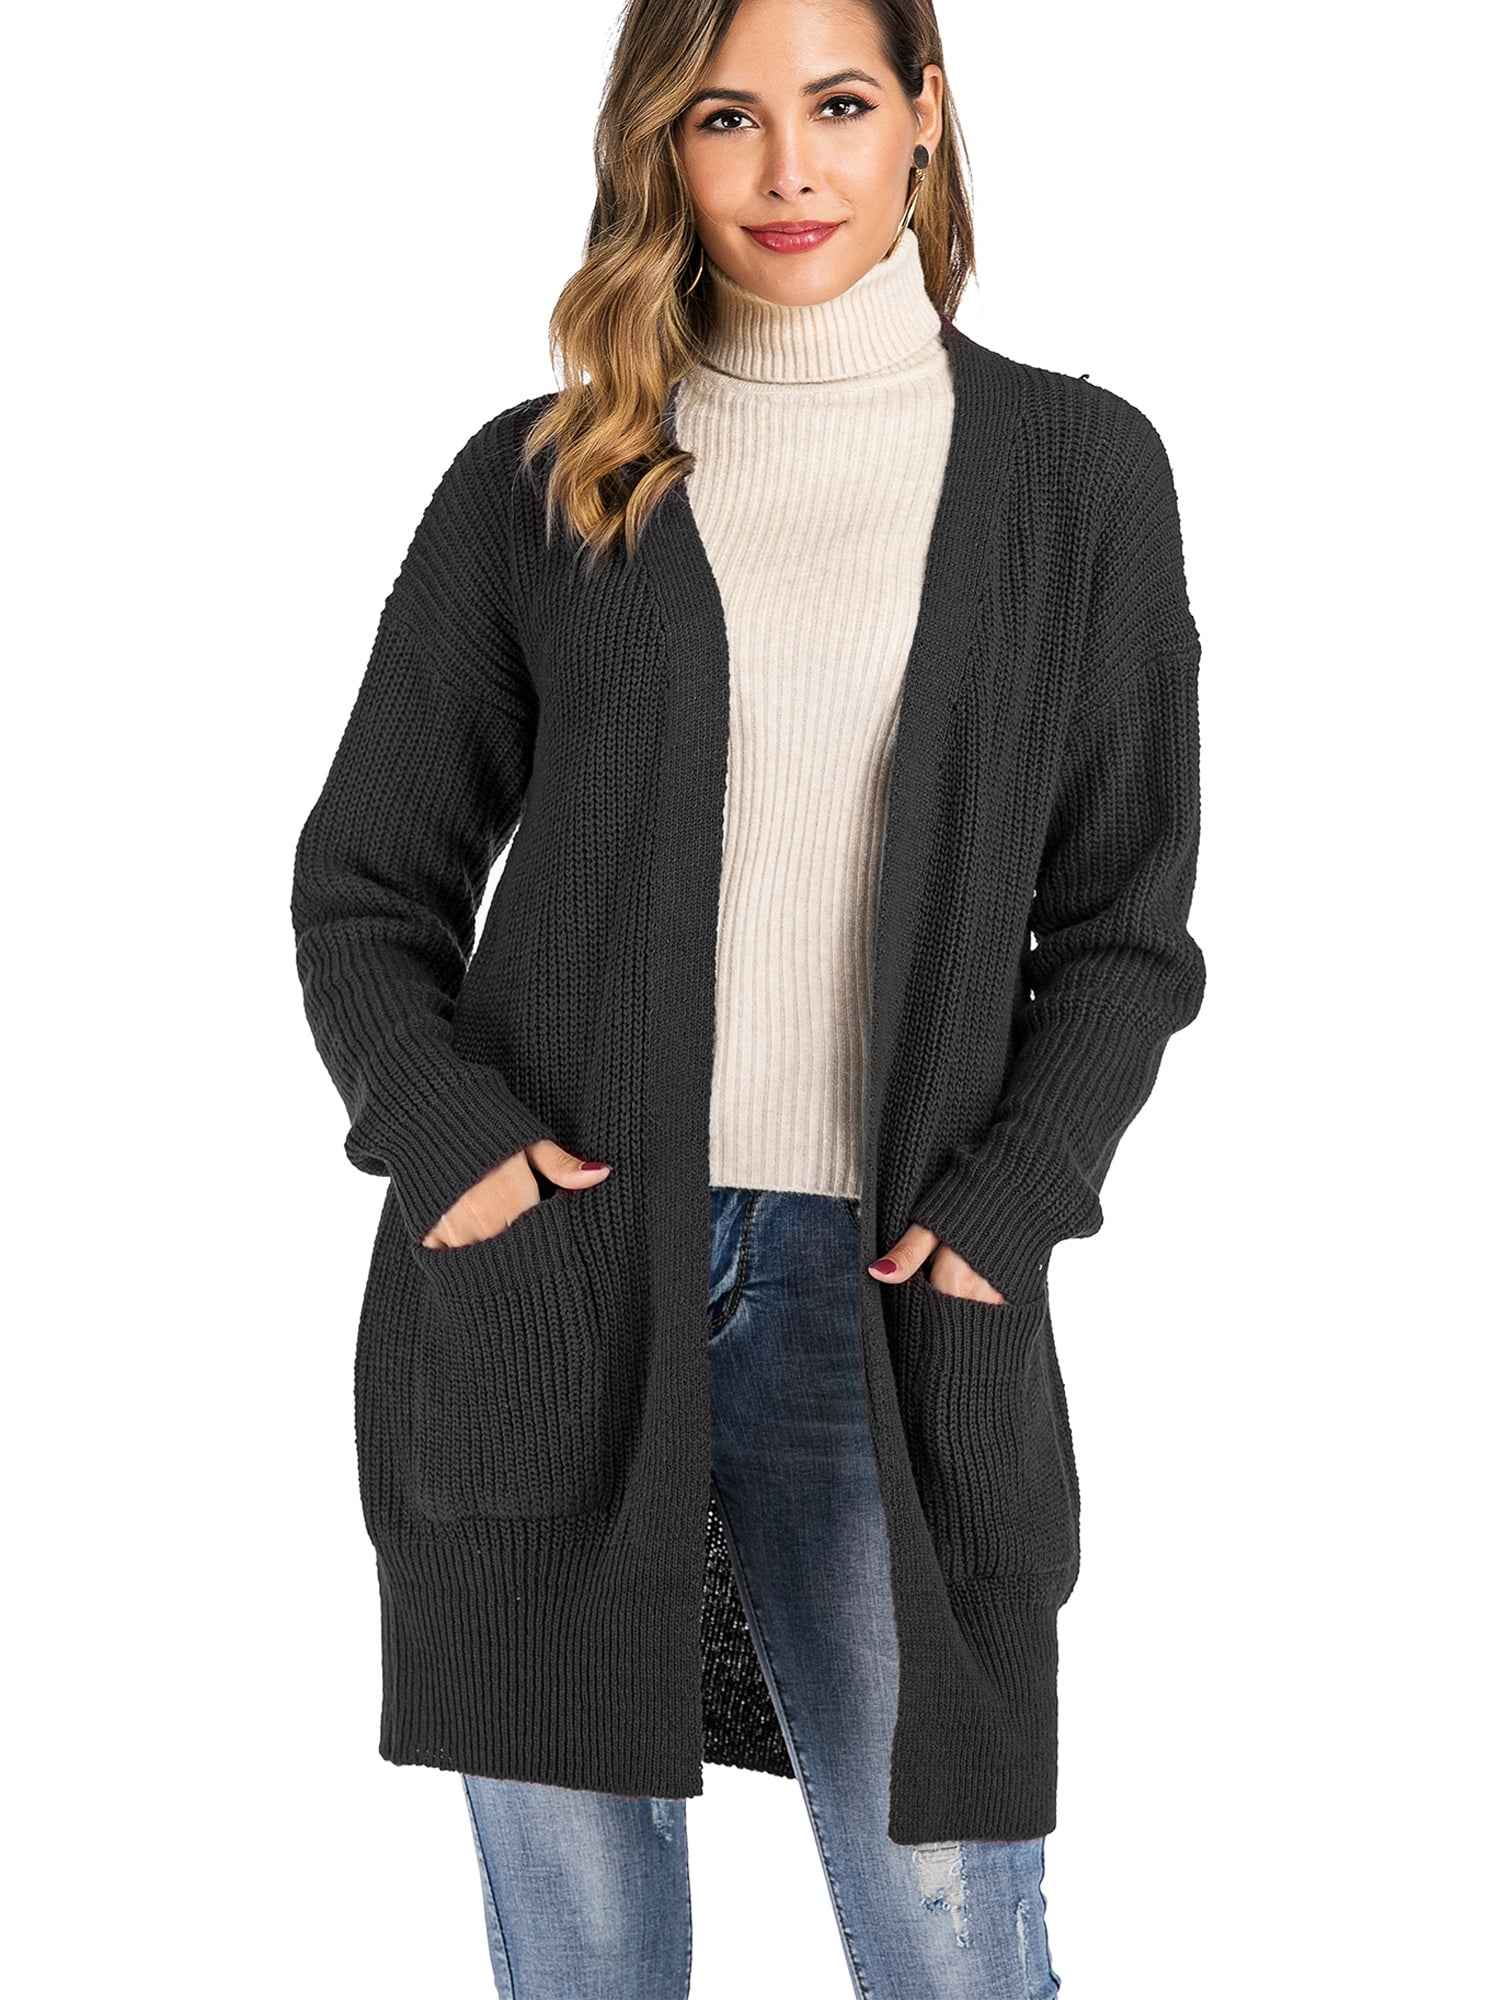 DODOING Womens Winter Cardigan Plus Size Solid Open Front chunky knit ...